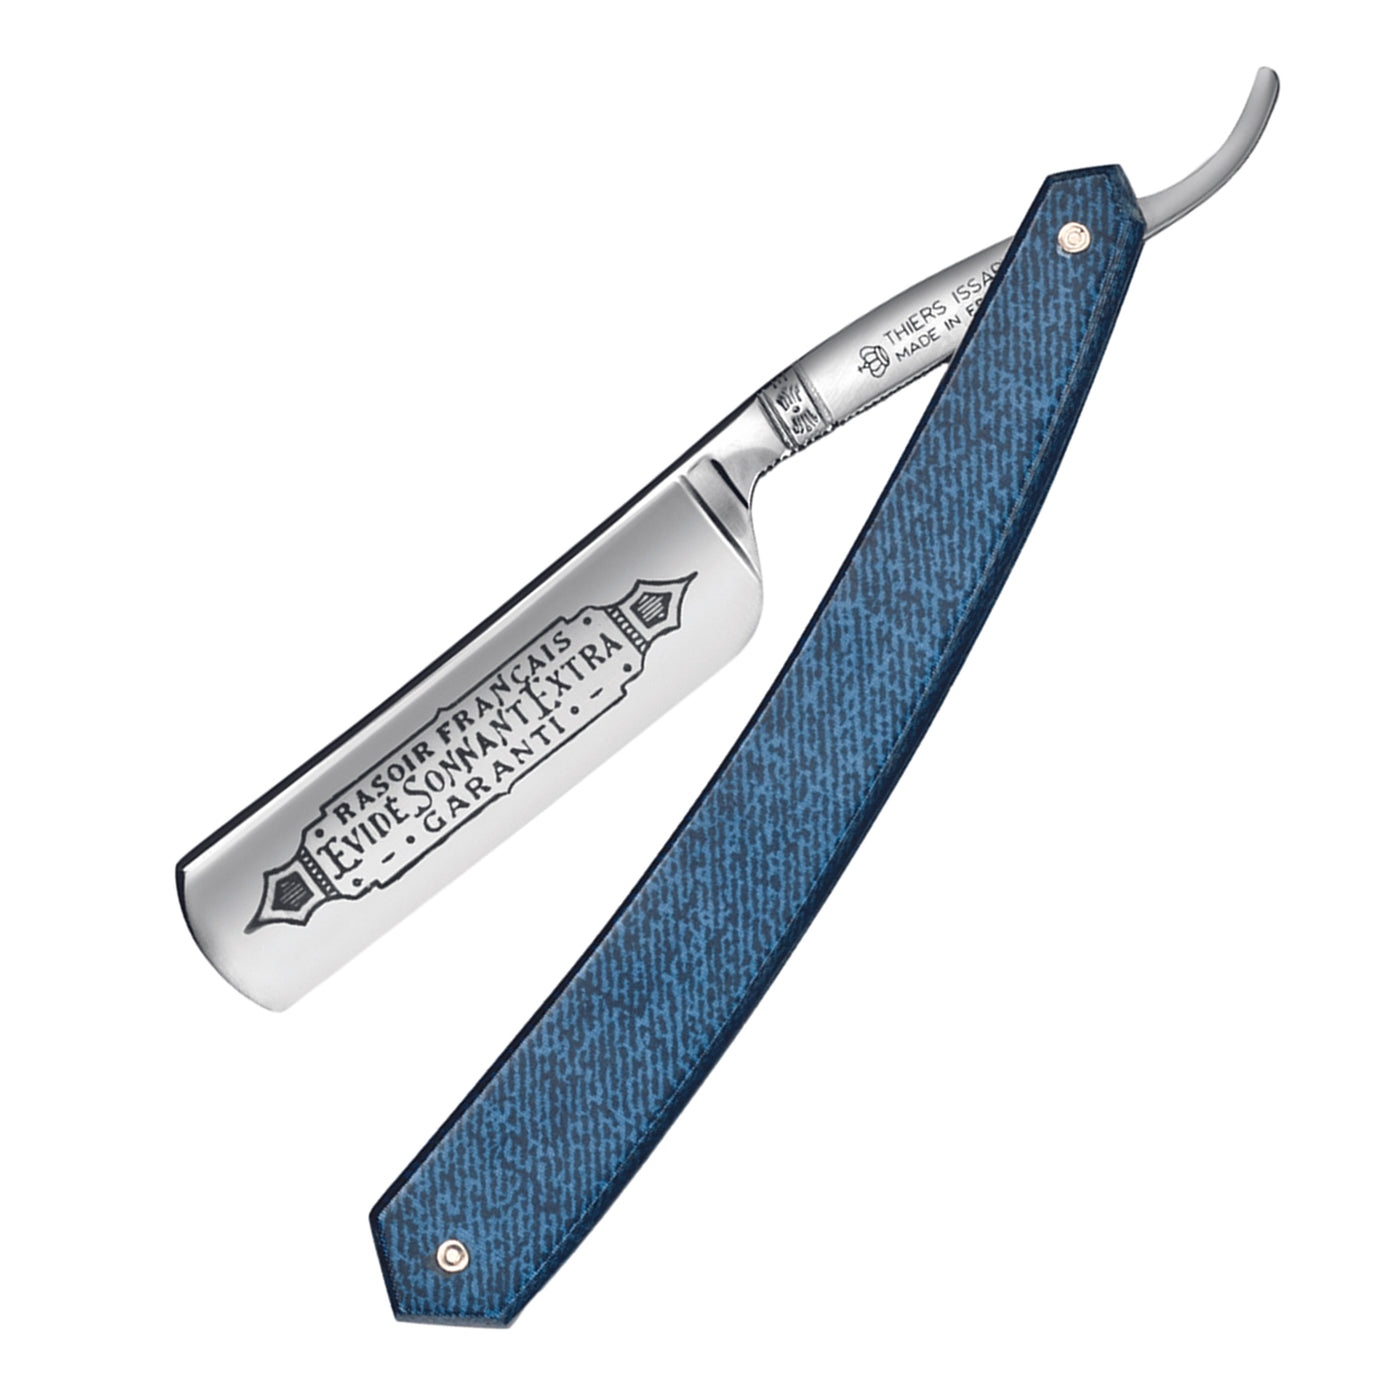 Thiers Issard 1196 Evide Sonnant Extra 6/8" Blue Jeans Micarta Straight Razor